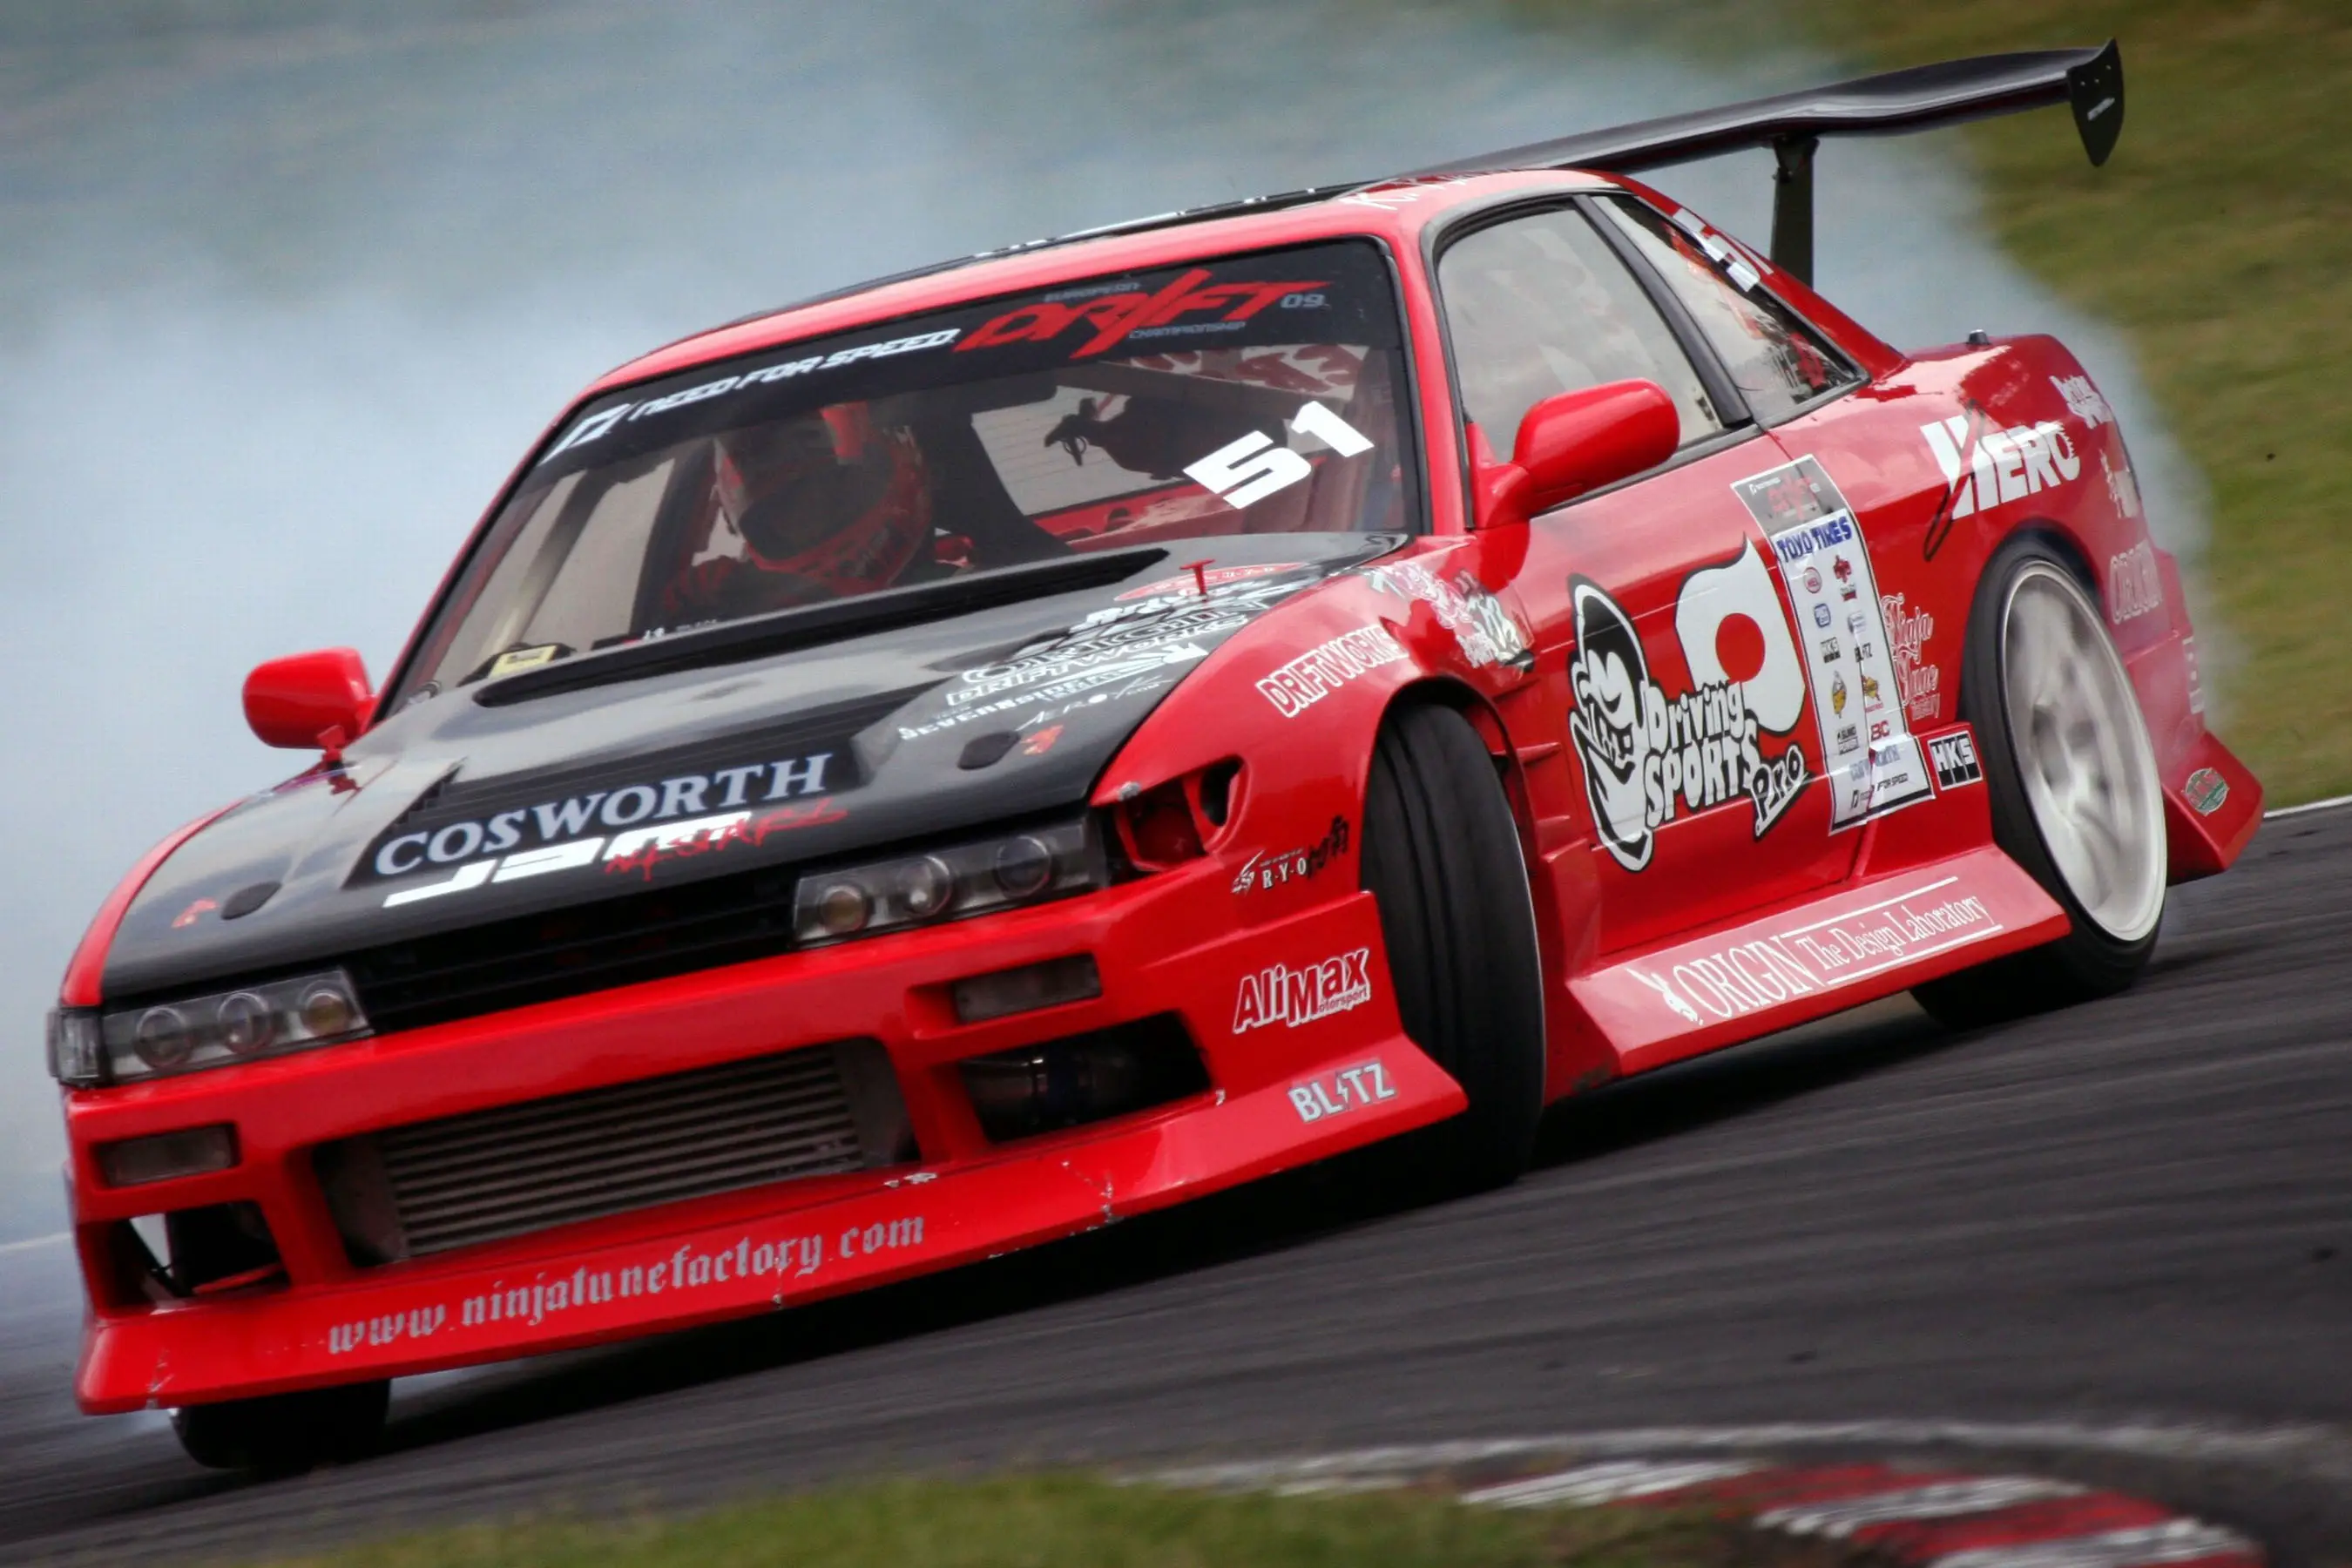 European Drift Championships to Wow Middle East Car Fans